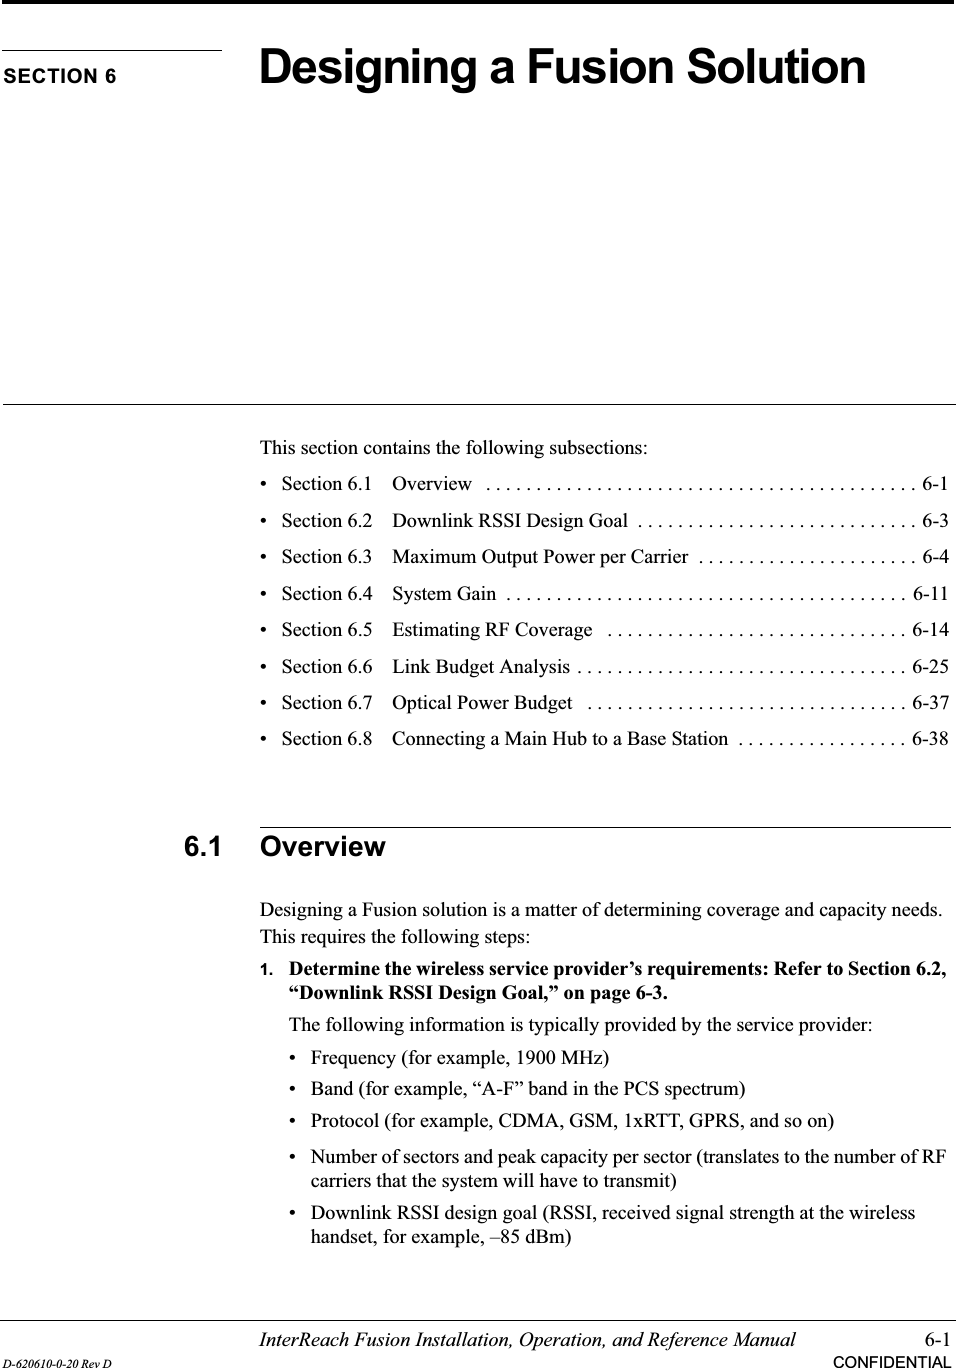 InterReach Fusion Installation, Operation, and Reference Manual 6-1D-620610-0-20 Rev D CONFIDENTIALSECTION 6 Designing a Fusion SolutionThis section contains the following subsections:• Section 6.1   Overview   . . . . . . . . . . . . . . . . . . . . . . . . . . . . . . . . . . . . . . . . . . . 6-1• Section 6.2   Downlink RSSI Design Goal  . . . . . . . . . . . . . . . . . . . . . . . . . . . . 6-3• Section 6.3   Maximum Output Power per Carrier  . . . . . . . . . . . . . . . . . . . . . . 6-4• Section 6.4   System Gain  . . . . . . . . . . . . . . . . . . . . . . . . . . . . . . . . . . . . . . . . 6-11• Section 6.5   Estimating RF Coverage   . . . . . . . . . . . . . . . . . . . . . . . . . . . . . . 6-14• Section 6.6   Link Budget Analysis . . . . . . . . . . . . . . . . . . . . . . . . . . . . . . . . . 6-25• Section 6.7   Optical Power Budget   . . . . . . . . . . . . . . . . . . . . . . . . . . . . . . . . 6-37• Section 6.8   Connecting a Main Hub to a Base Station  . . . . . . . . . . . . . . . . . 6-386.1 OverviewDesigning a Fusion solution is a matter of determining coverage and capacity needs. This requires the following steps:1. Determine the wireless service provider’s requirements: Refer to Section 6.2, “Downlink RSSI Design Goal,” on page 6-3.The following information is typically provided by the service provider:• Frequency (for example, 1900 MHz)• Band (for example, “A-F” band in the PCS spectrum)• Protocol (for example, CDMA, GSM, 1xRTT, GPRS, and so on)• Number of sectors and peak capacity per sector (translates to the number of RF carriers that the system will have to transmit)• Downlink RSSI design goal (RSSI, received signal strength at the wireless handset, for example, –85 dBm)